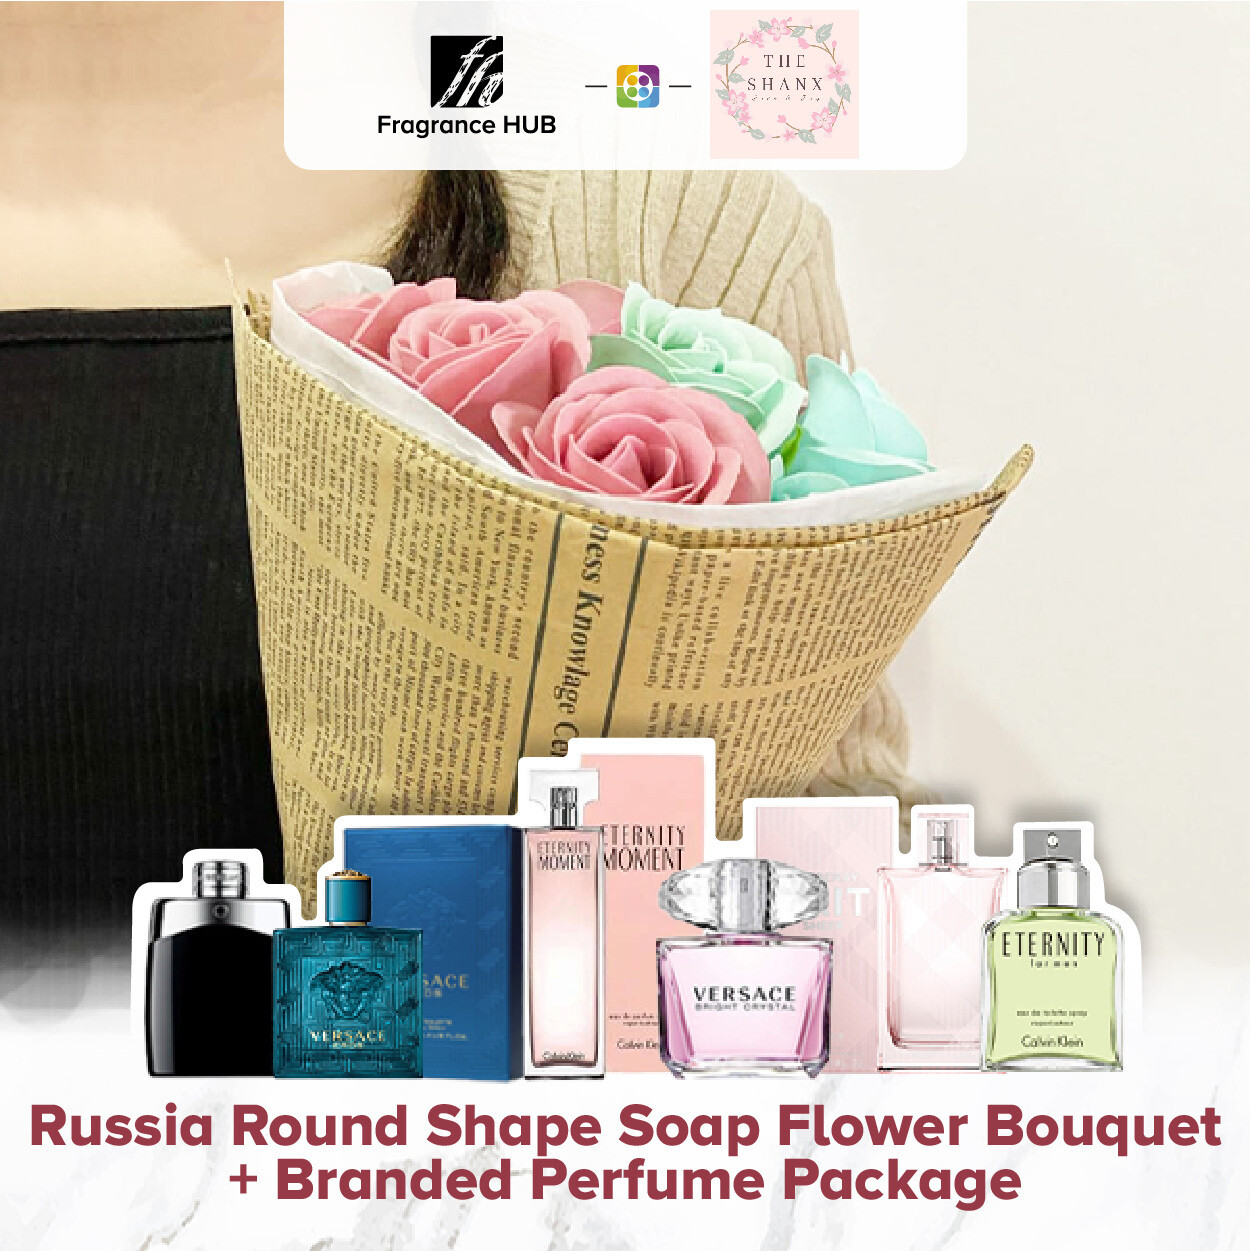 Russia Round Shape Soap Flower Bouquet + Fragrance Hub Branded Perfume (By: The Shanx Florist from Melaka)